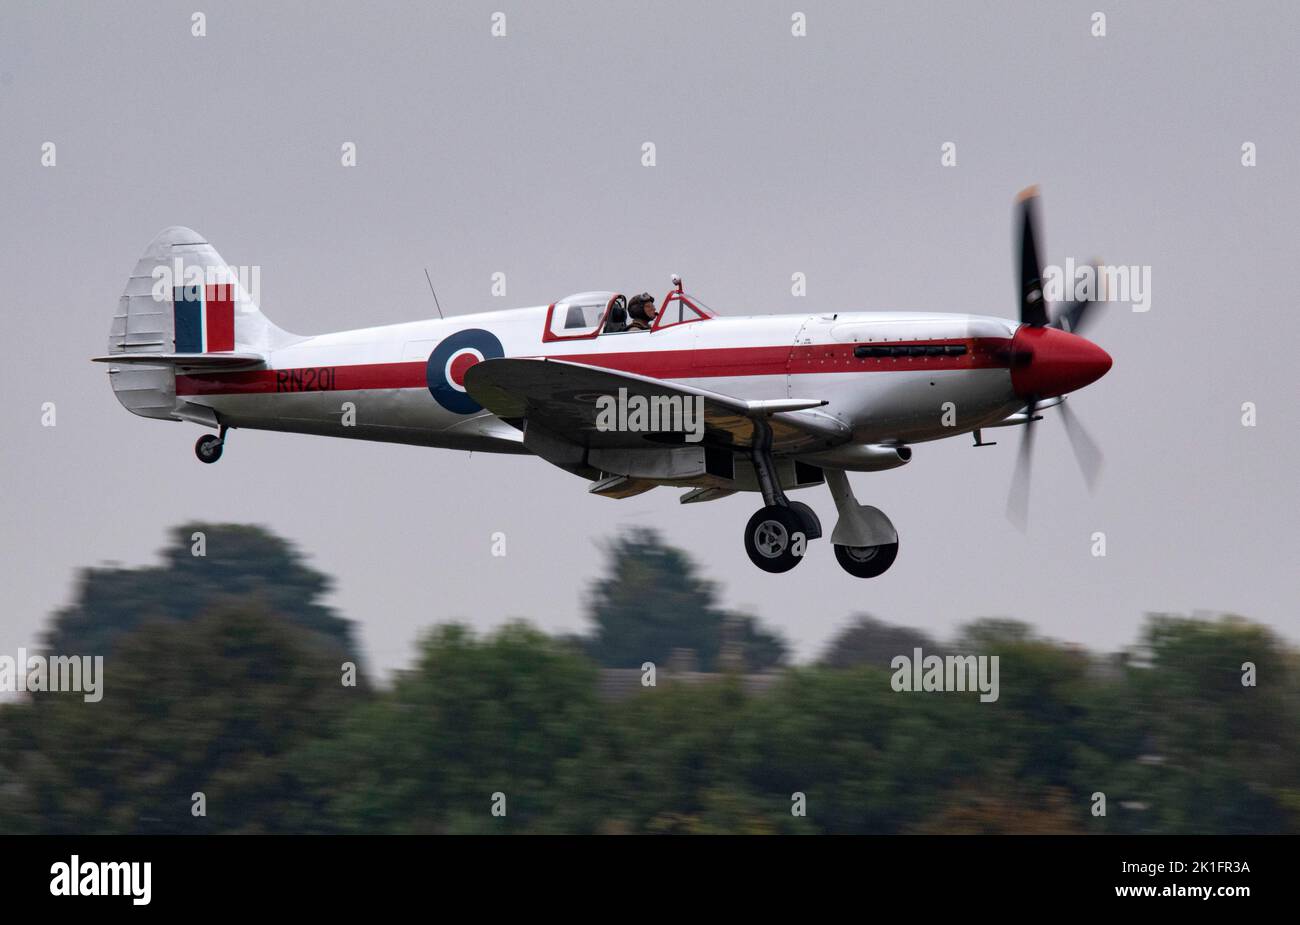 Supermarine Spitfire Mk.XIVe RN201 (G-BSKP) landing at dusk, after it's flying display at the IWM Duxford Battle of Britain Air show10th September 22 Stock Photo